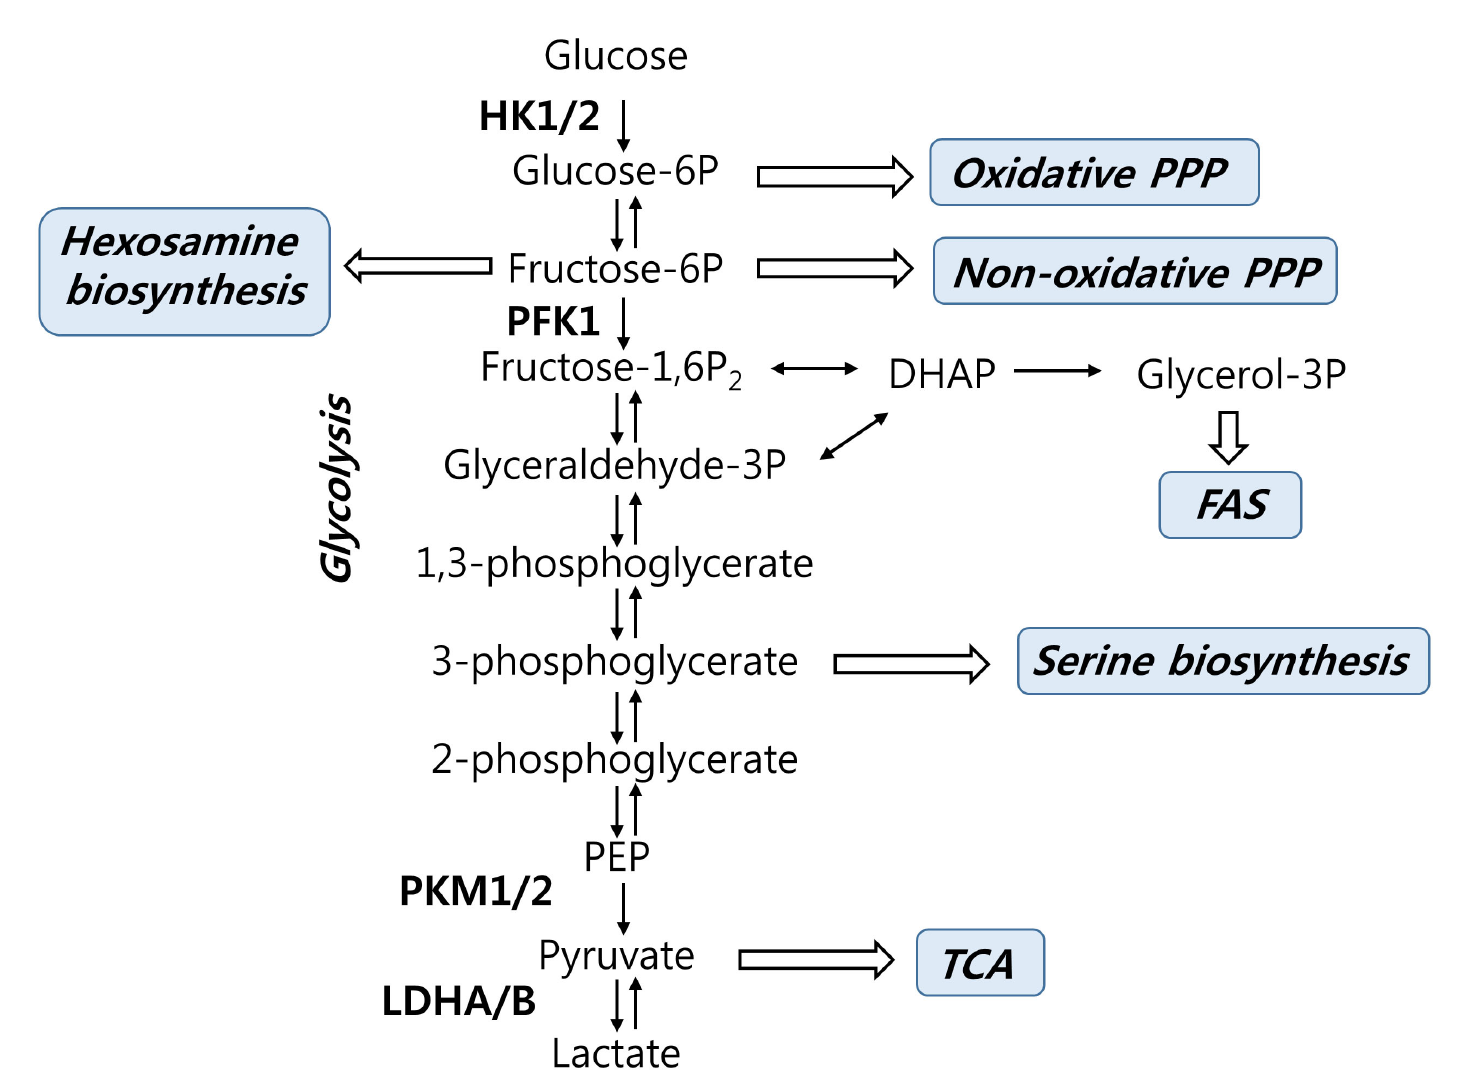 Figure 1 Glycolysis and its branching pathways. (Kim, 2018)